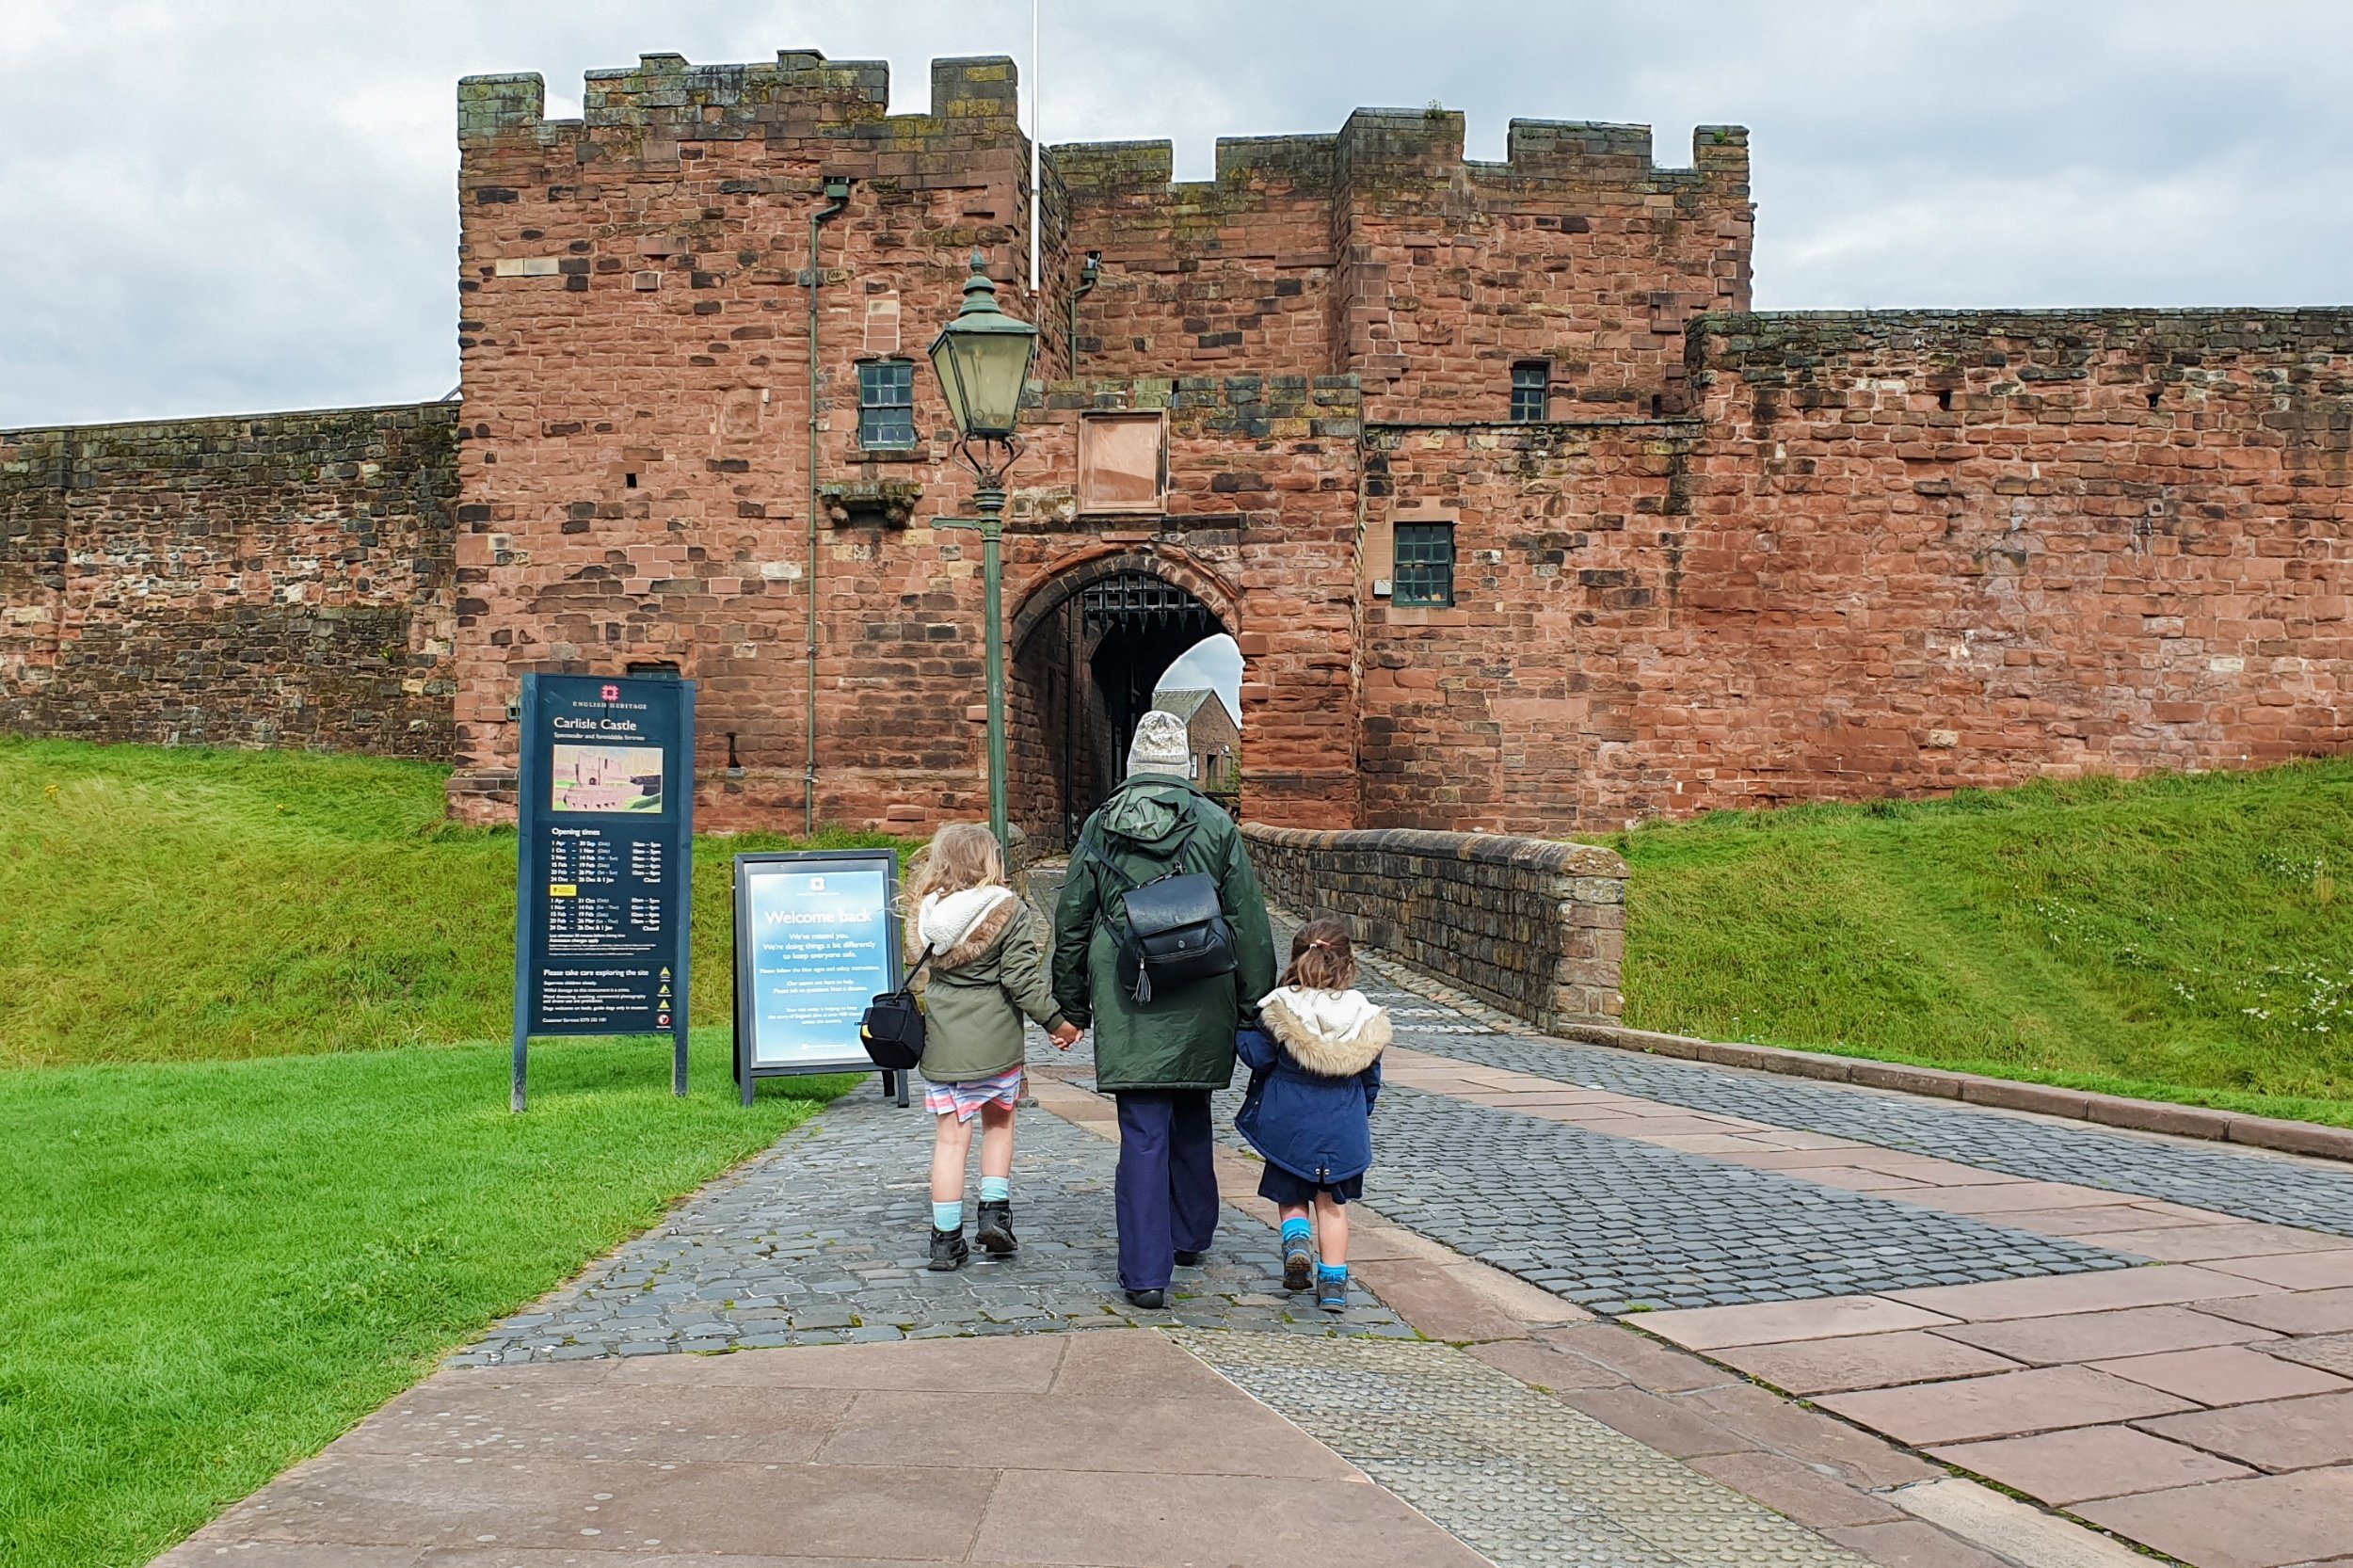 Squidgy and Pickle are holding their Grandma's hand and walking towards the entrance archway to Carlisle castle.